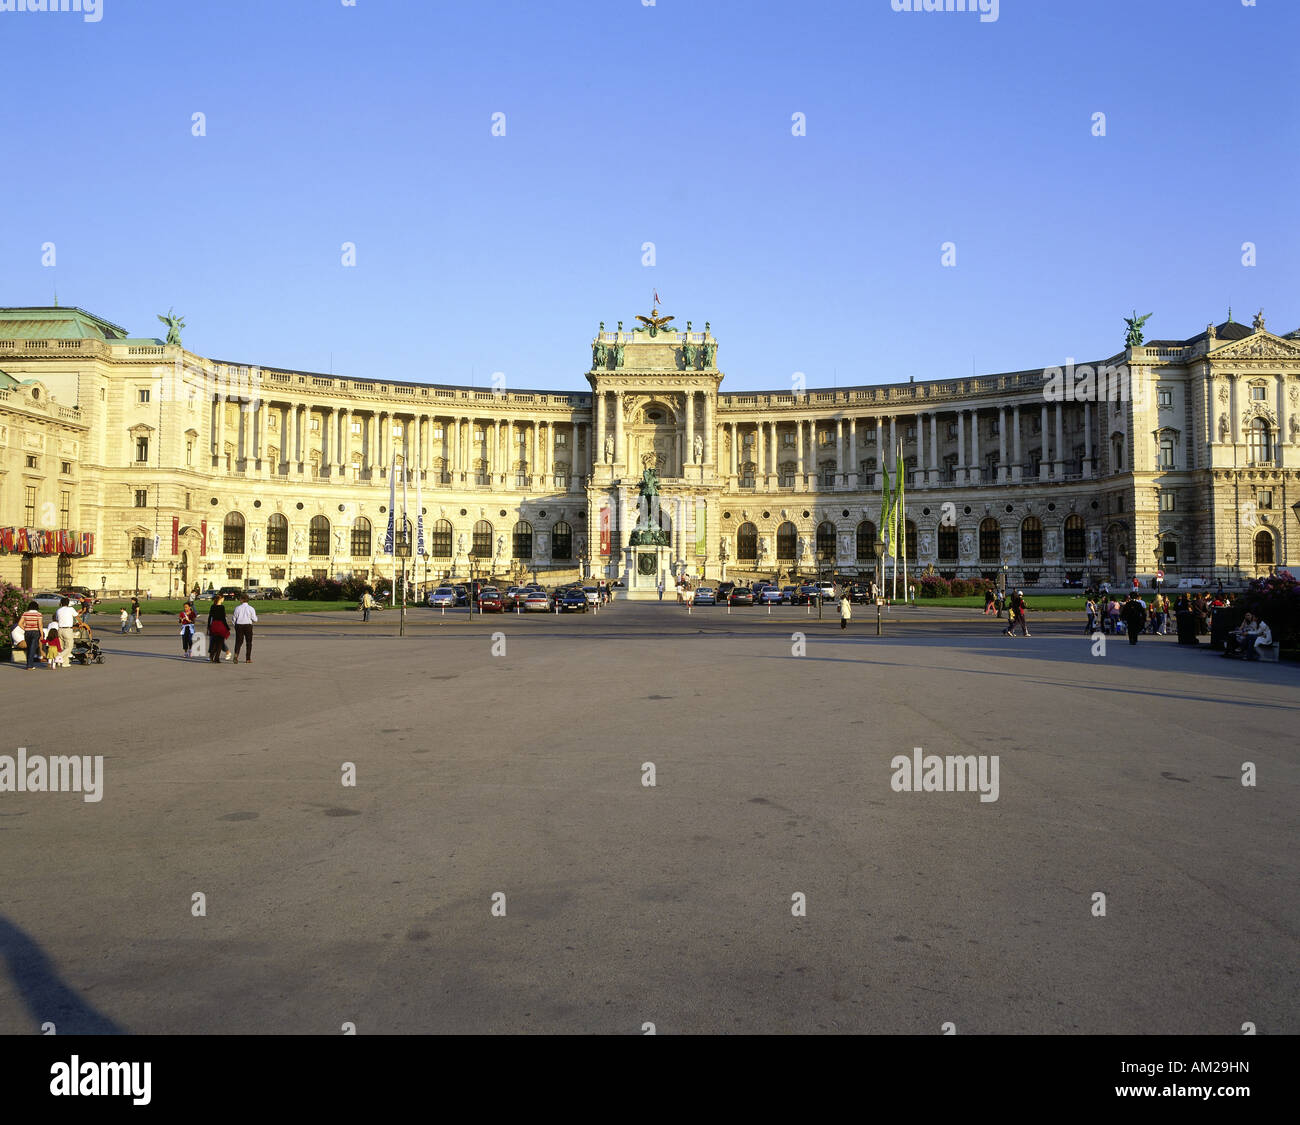 geography / travel, Austria, Vienna, buildings, Hofburg Imperial Palace, Neue Burg, exterior view, built: 1881 - 1913, National Library Austria, ÖNB, Additional-Rights-Clearance-Info-Not-Available Stock Photo